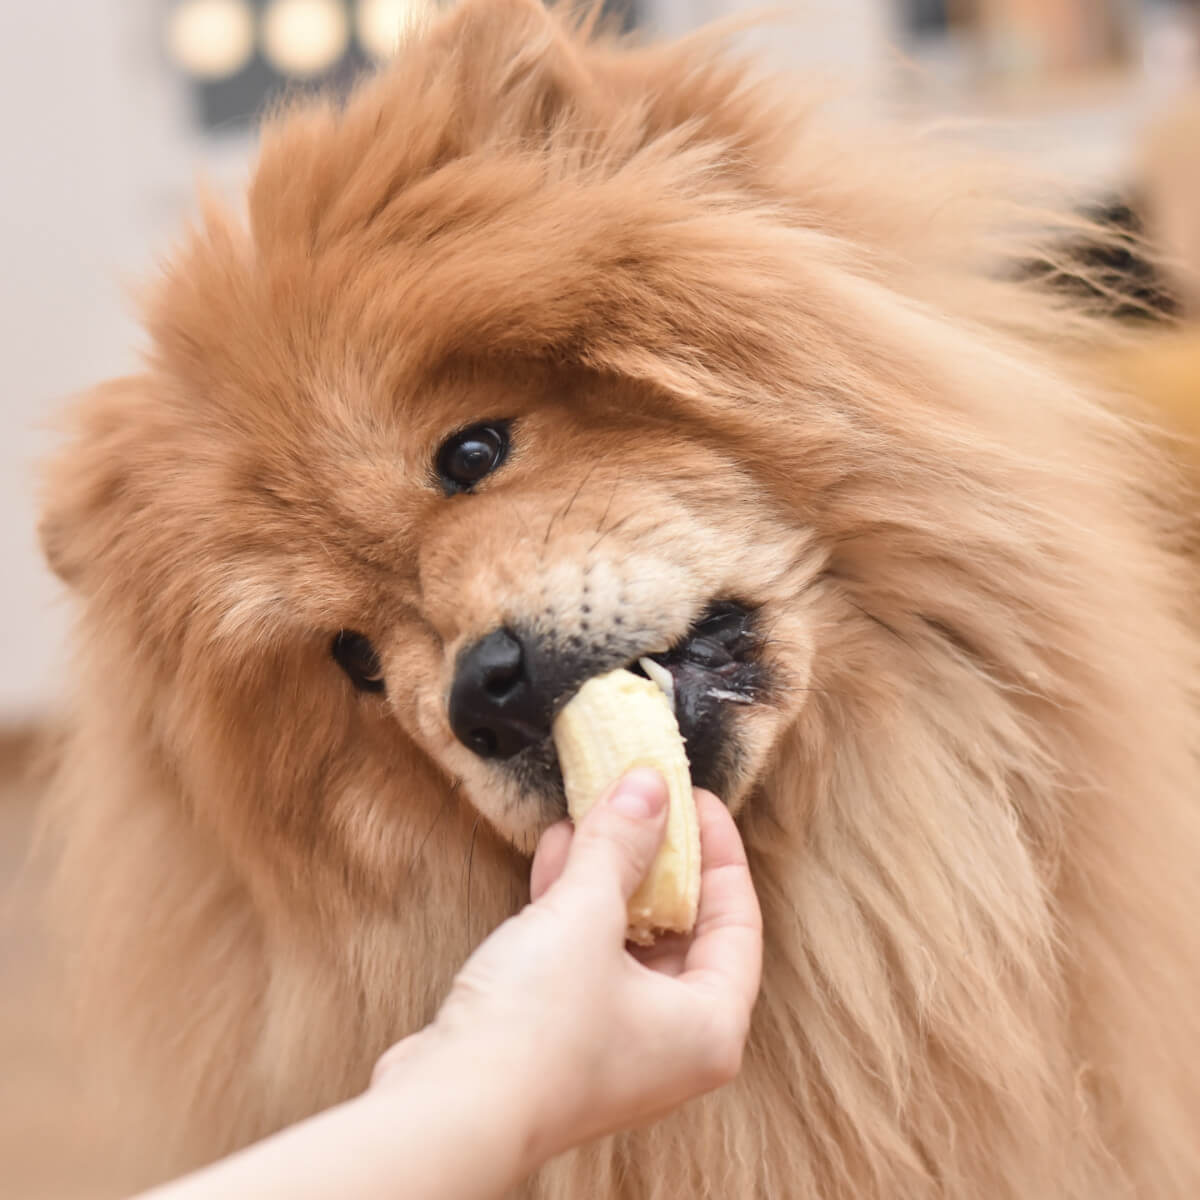 The Benefits of Bananas For Dogs